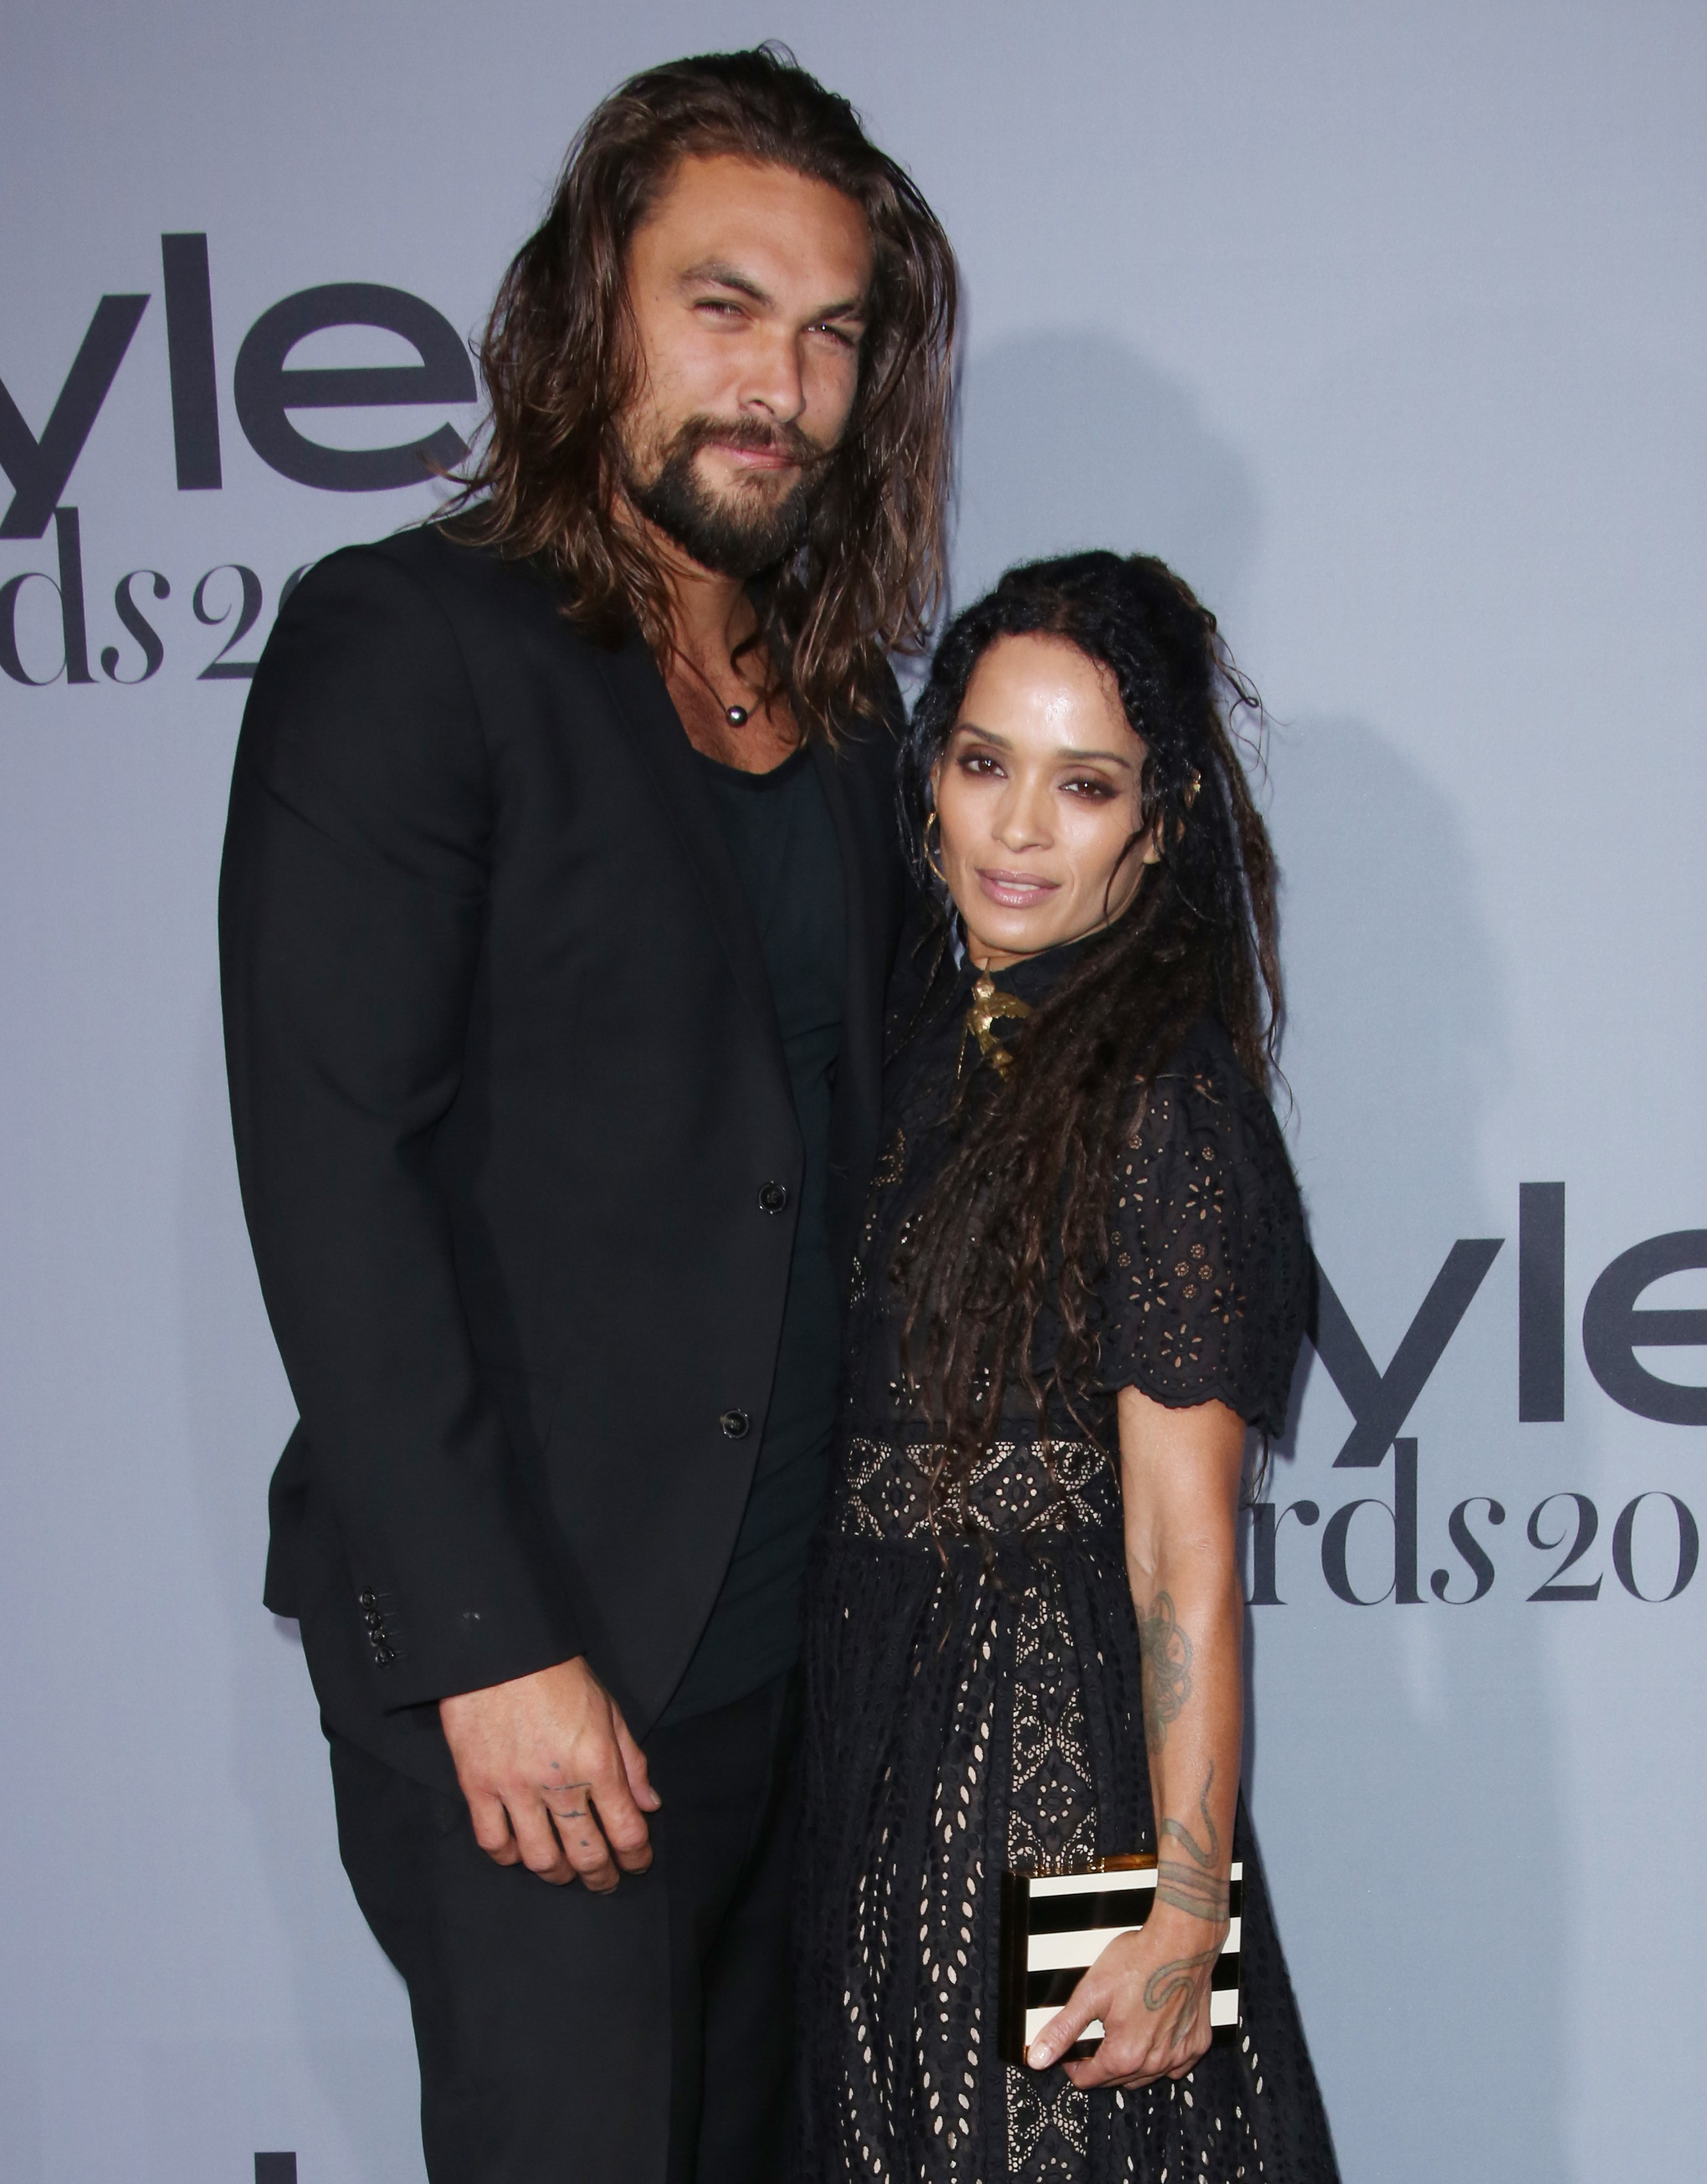 <p>During a 2017 appearance on "The Late Late Show with James Corden," Jason Momoa revealed when he fell for wife Lisa Bonet, how they met and what they did on their first date. "Listen, it was more than [love at first sight]. Ever since I was like 8 years old and I saw her on the TV, I was like, 'Mommy, I want that one,'" he said. "I was like, 'I'm going to stalk you for the rest of my life, and I'm going to get you.' I'm a full-fledged stalker... I didn't tell her that... She was a queen, always." Fast-forward a few decades and the "Game of Thrones" alum finally met the "Cosby Show" star at a jazz club in 2005 -- "right place, right time" Jason said. When she introduced herself, Jason turned to a buddy and started squealing. "I had f****** fireworks going off inside, man," he recalled. He was living in a hotel and didn't have a car at the time and "convinced her to take me home," he added. They ended up at Cafe 101. "She ordered a Guinness and that was it. I beyond love Guinness... Then I ordered grits. And the rest is history," he said. They had two kids together and married in 2017. In 2022, they announced<a href="https://www.wonderwall.com/celebrity/couples/most-surprising-breakups-in-hollywood-shocking-celebrity-splits-419343.gallery"> their split</a>.</p>